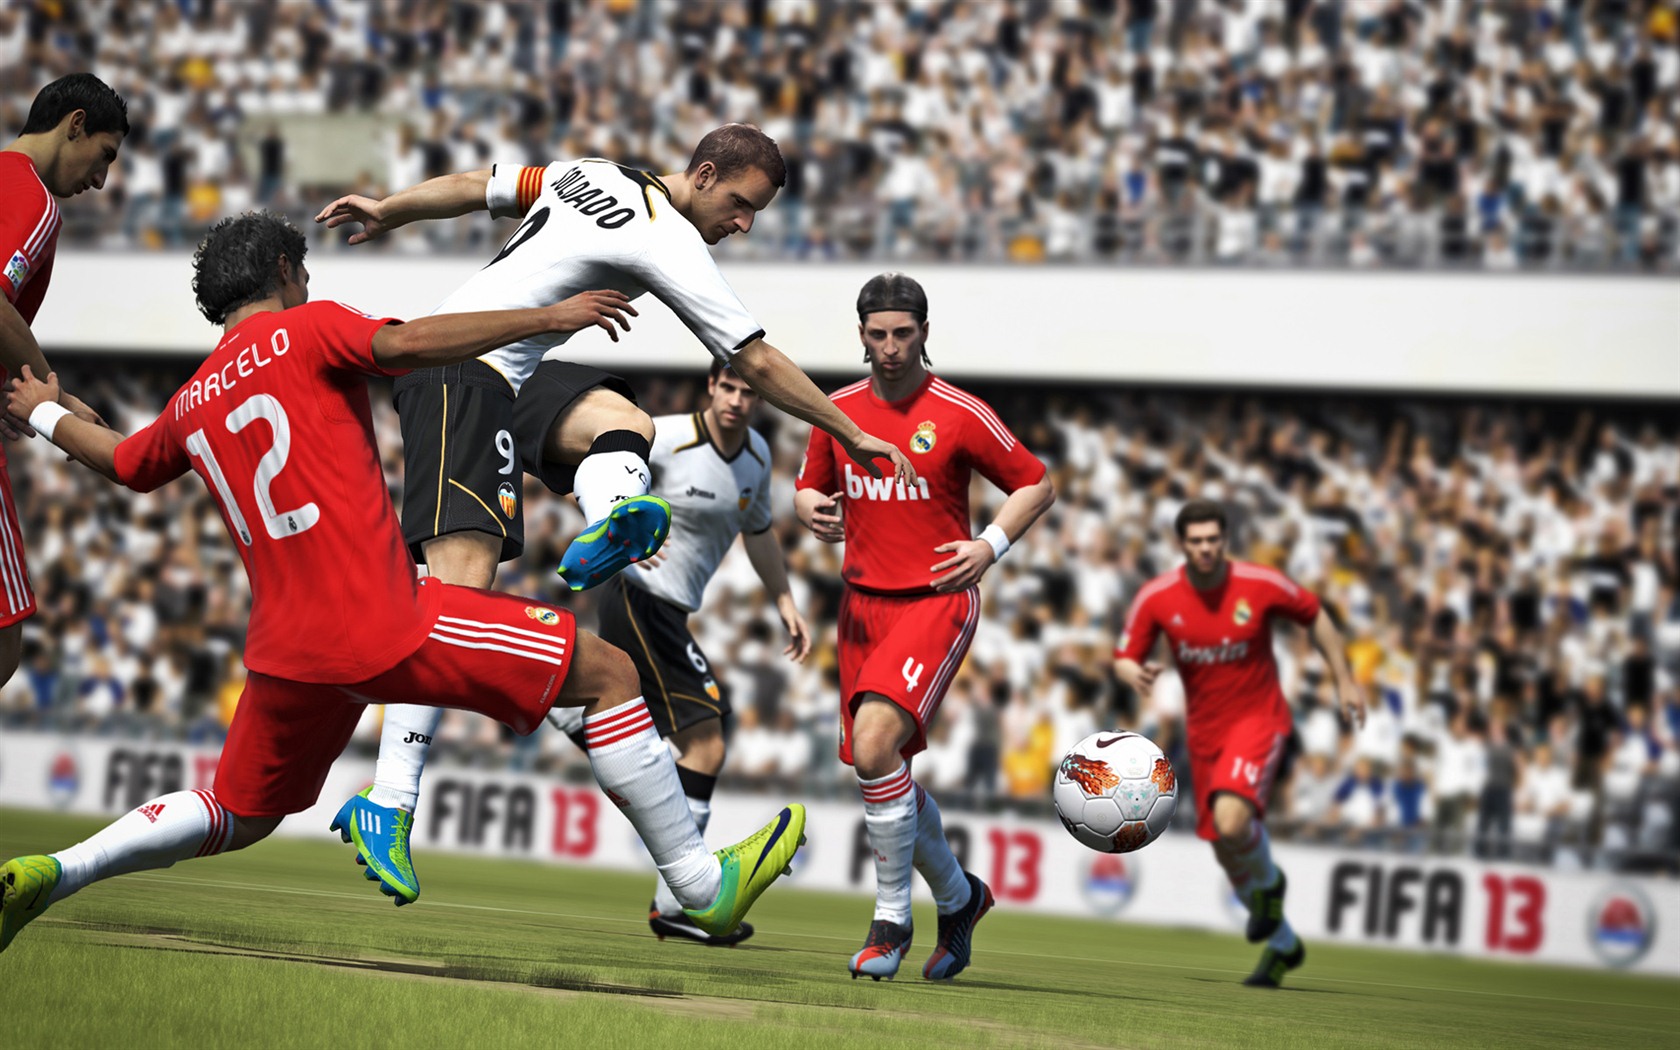 FIFA 13 game HD wallpapers #17 - 1680x1050